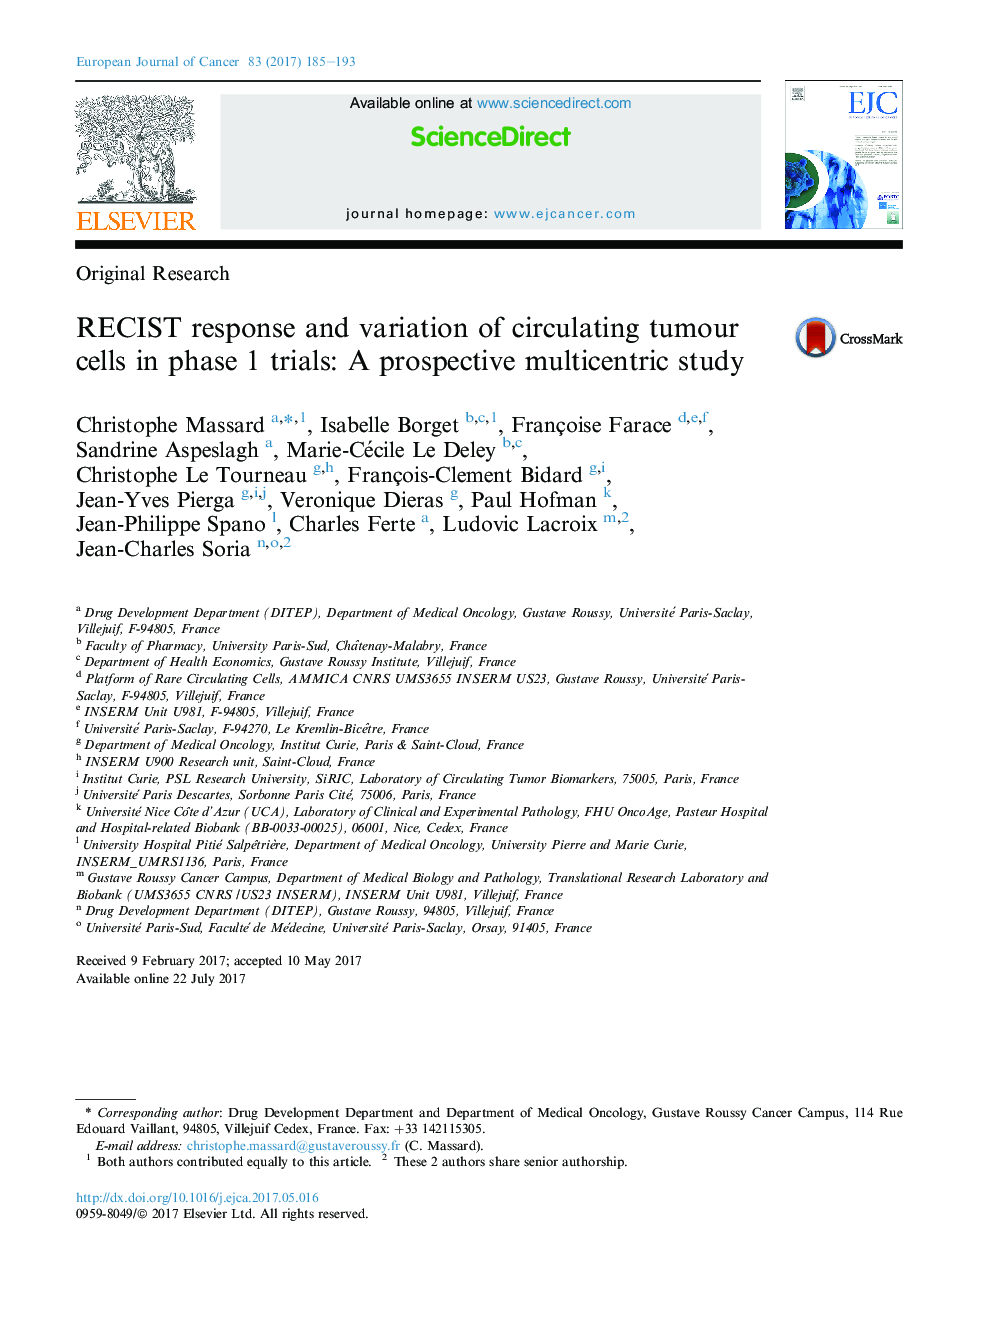 Original ResearchRECIST response and variation of circulating tumour cells in phase 1 trials: A prospective multicentric study